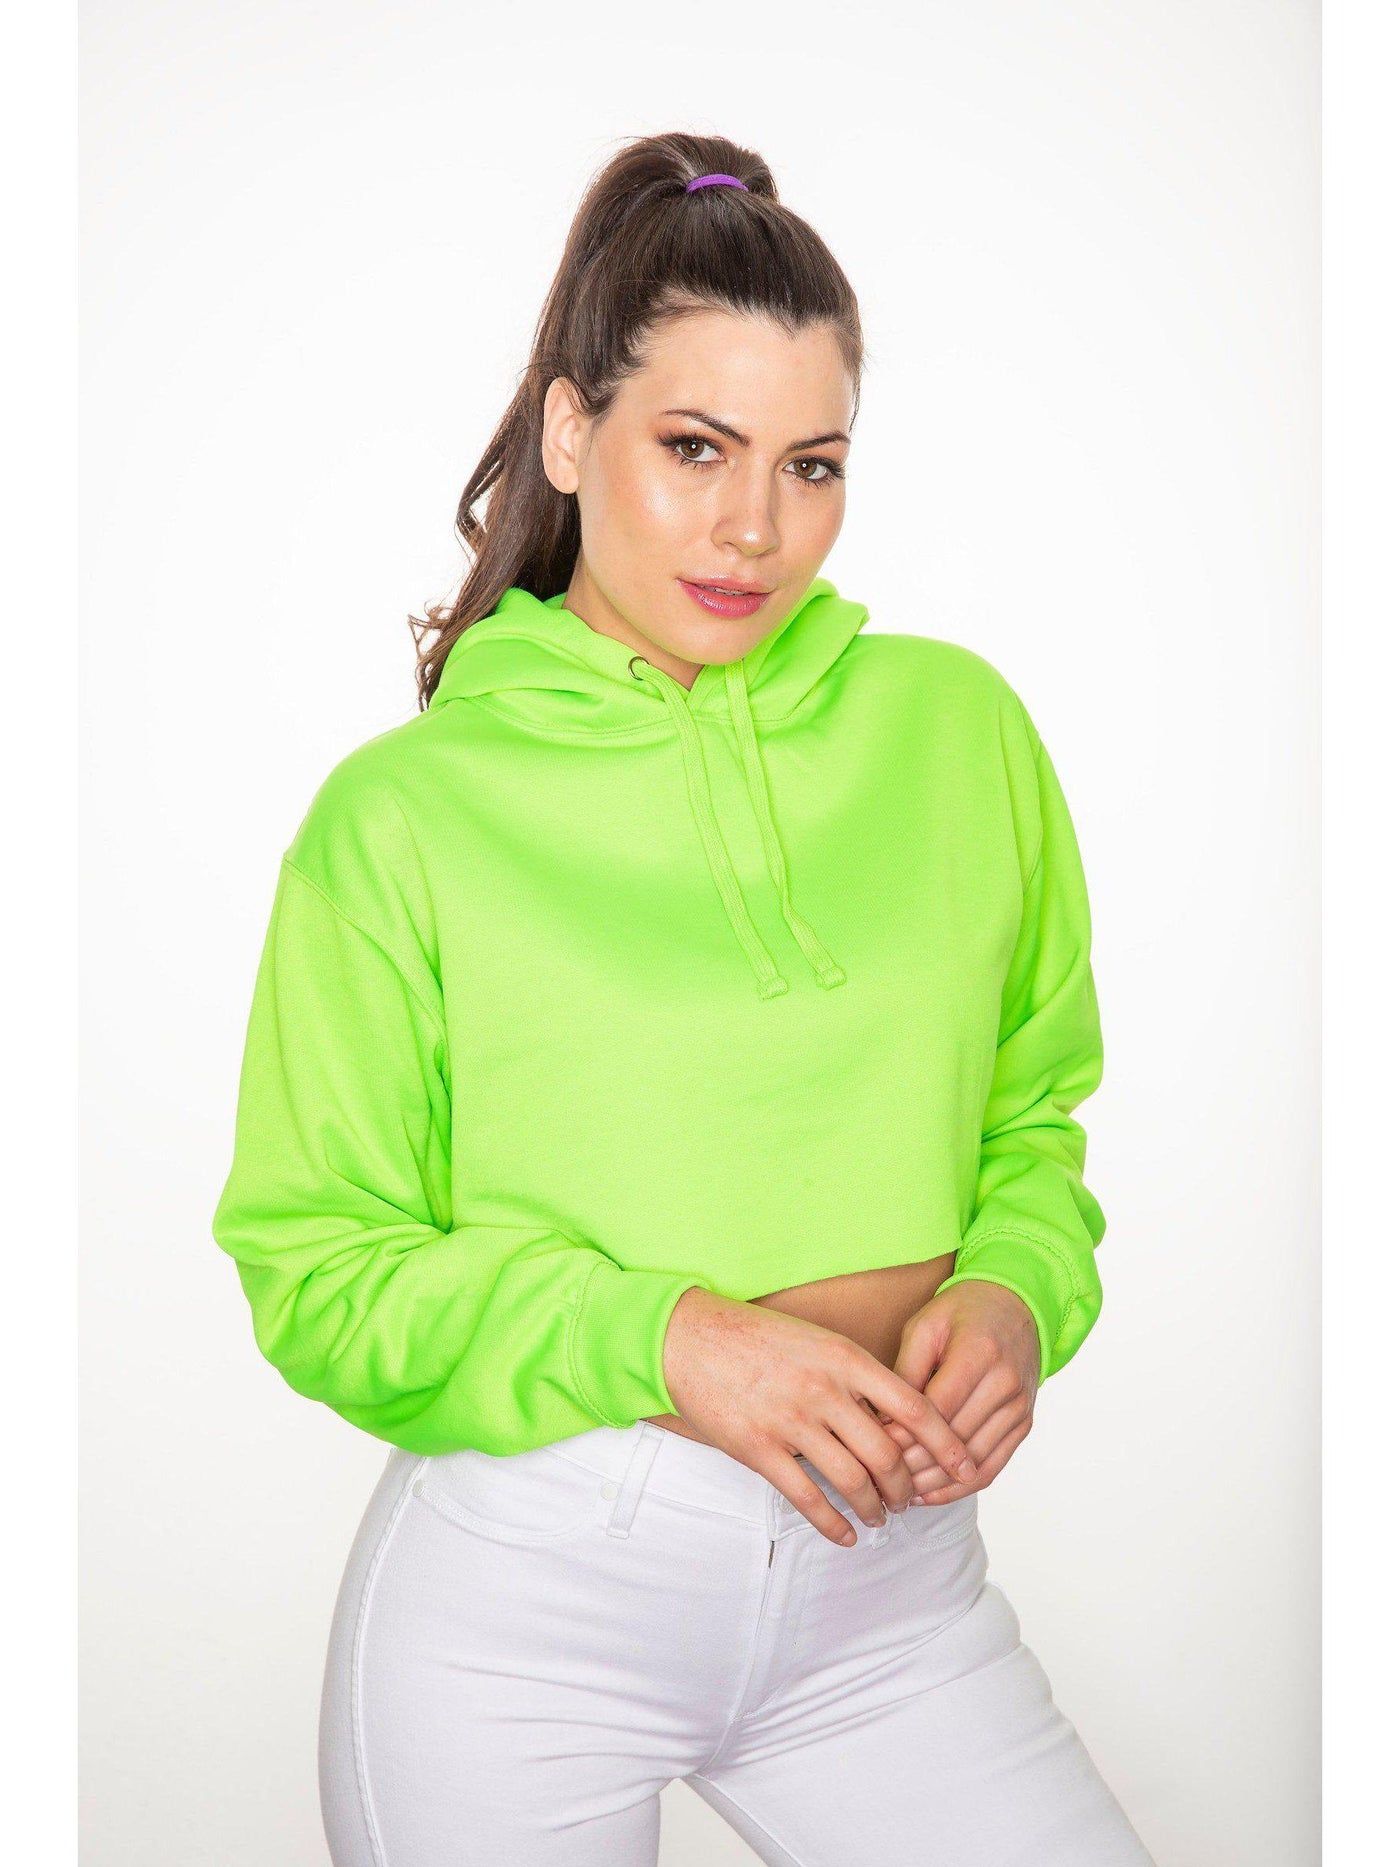 NEON green cropped hoodie